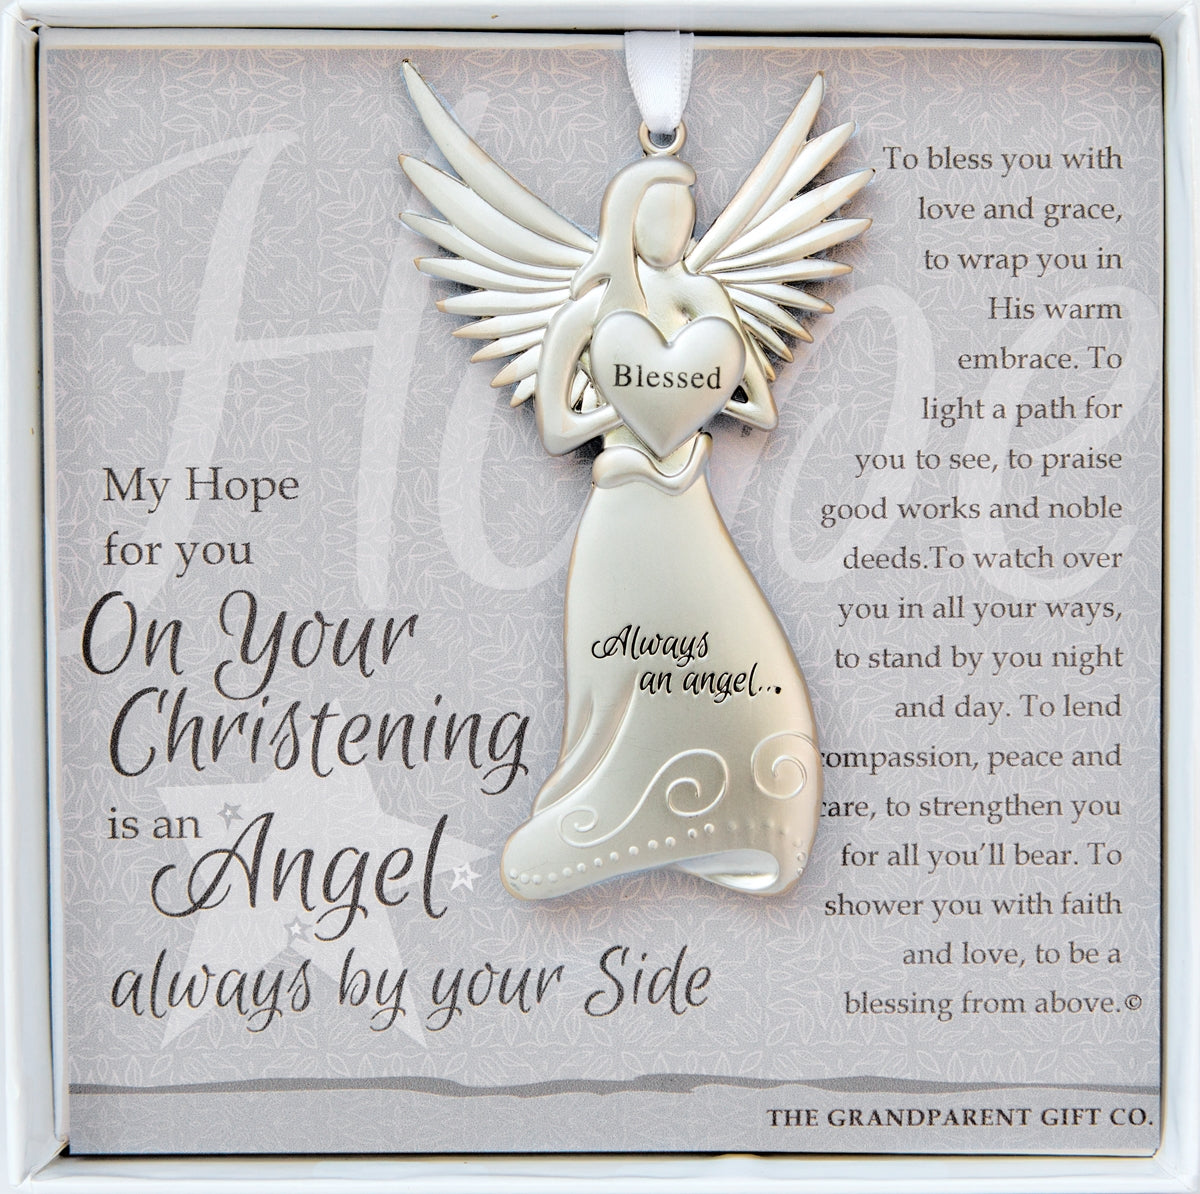 Christening Gift - 4" metal blessed angel ornament with "On Your Christening" poem in white box with clear lid.